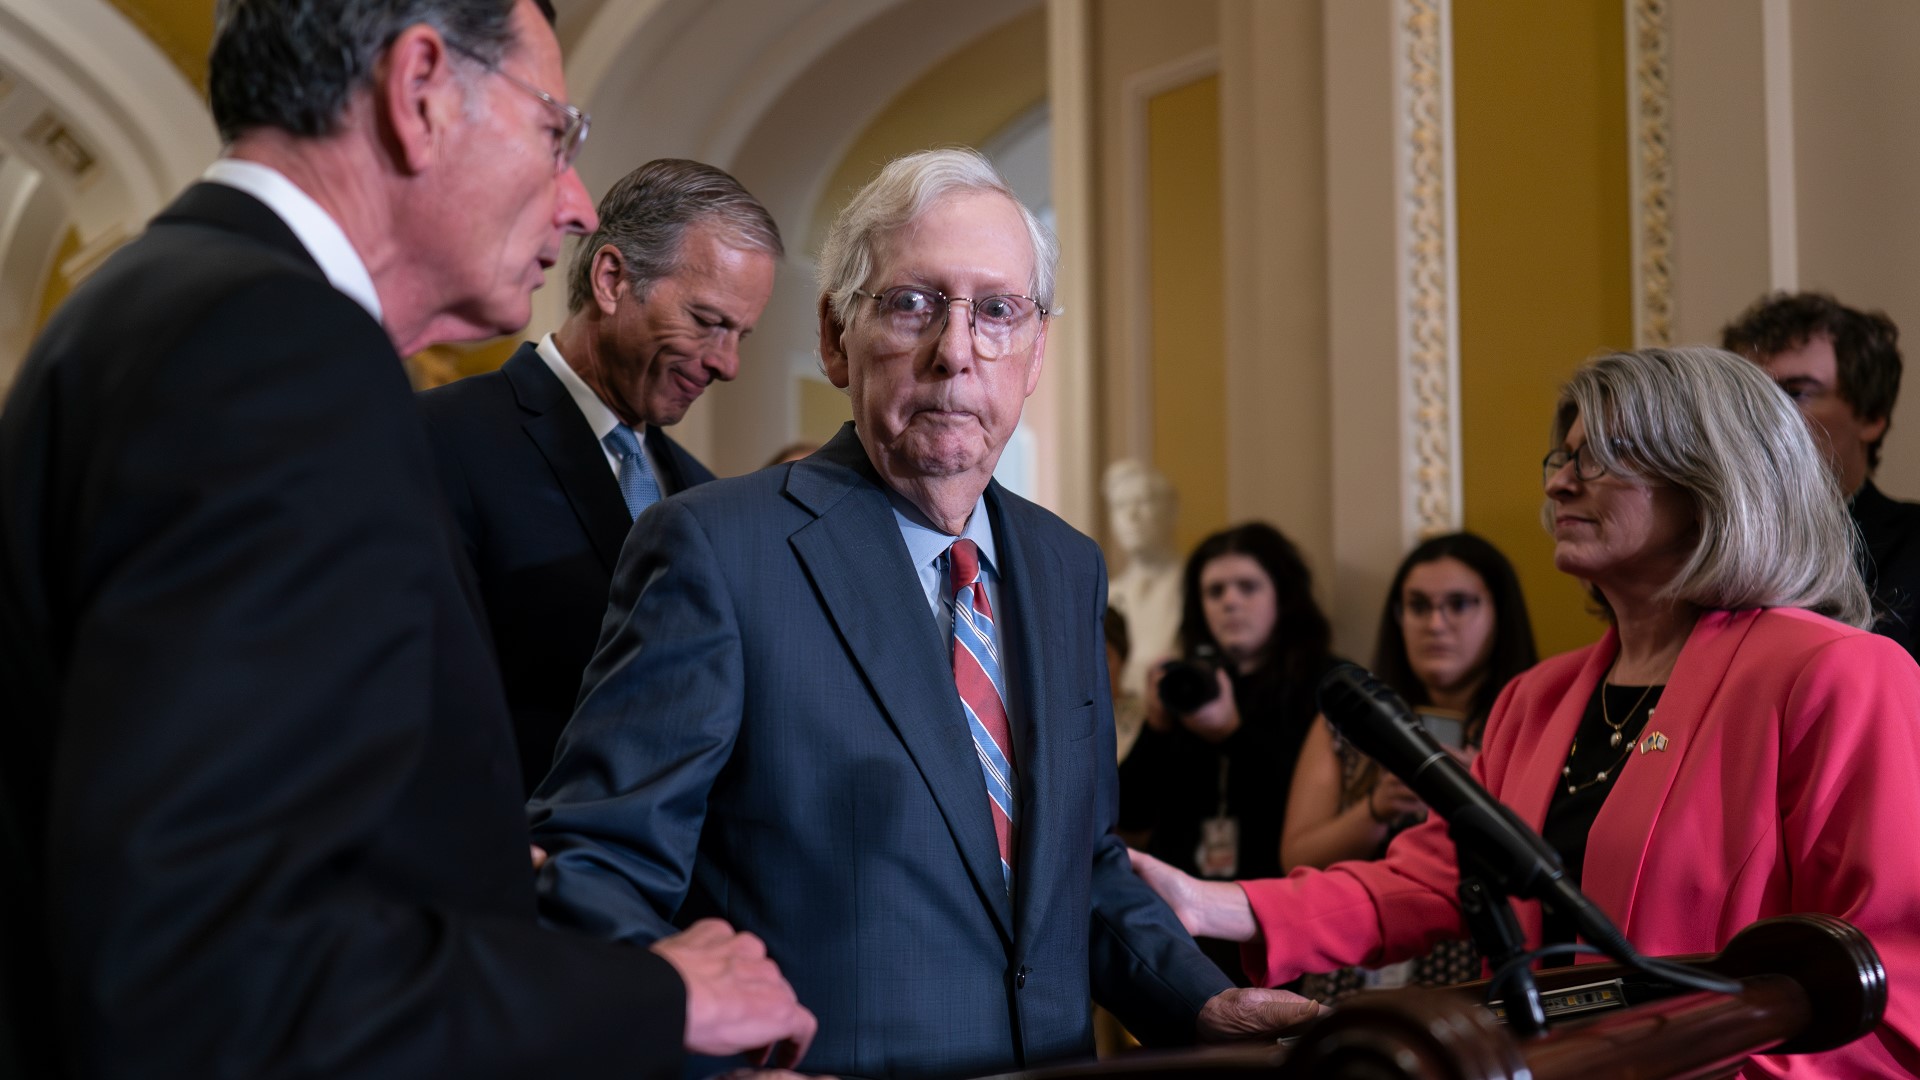 Sen. Mitch McConnell abruptly stopped speaking Wednesday during a press event at the U.S. Capitol. He later returned and assured reporters he was ok.